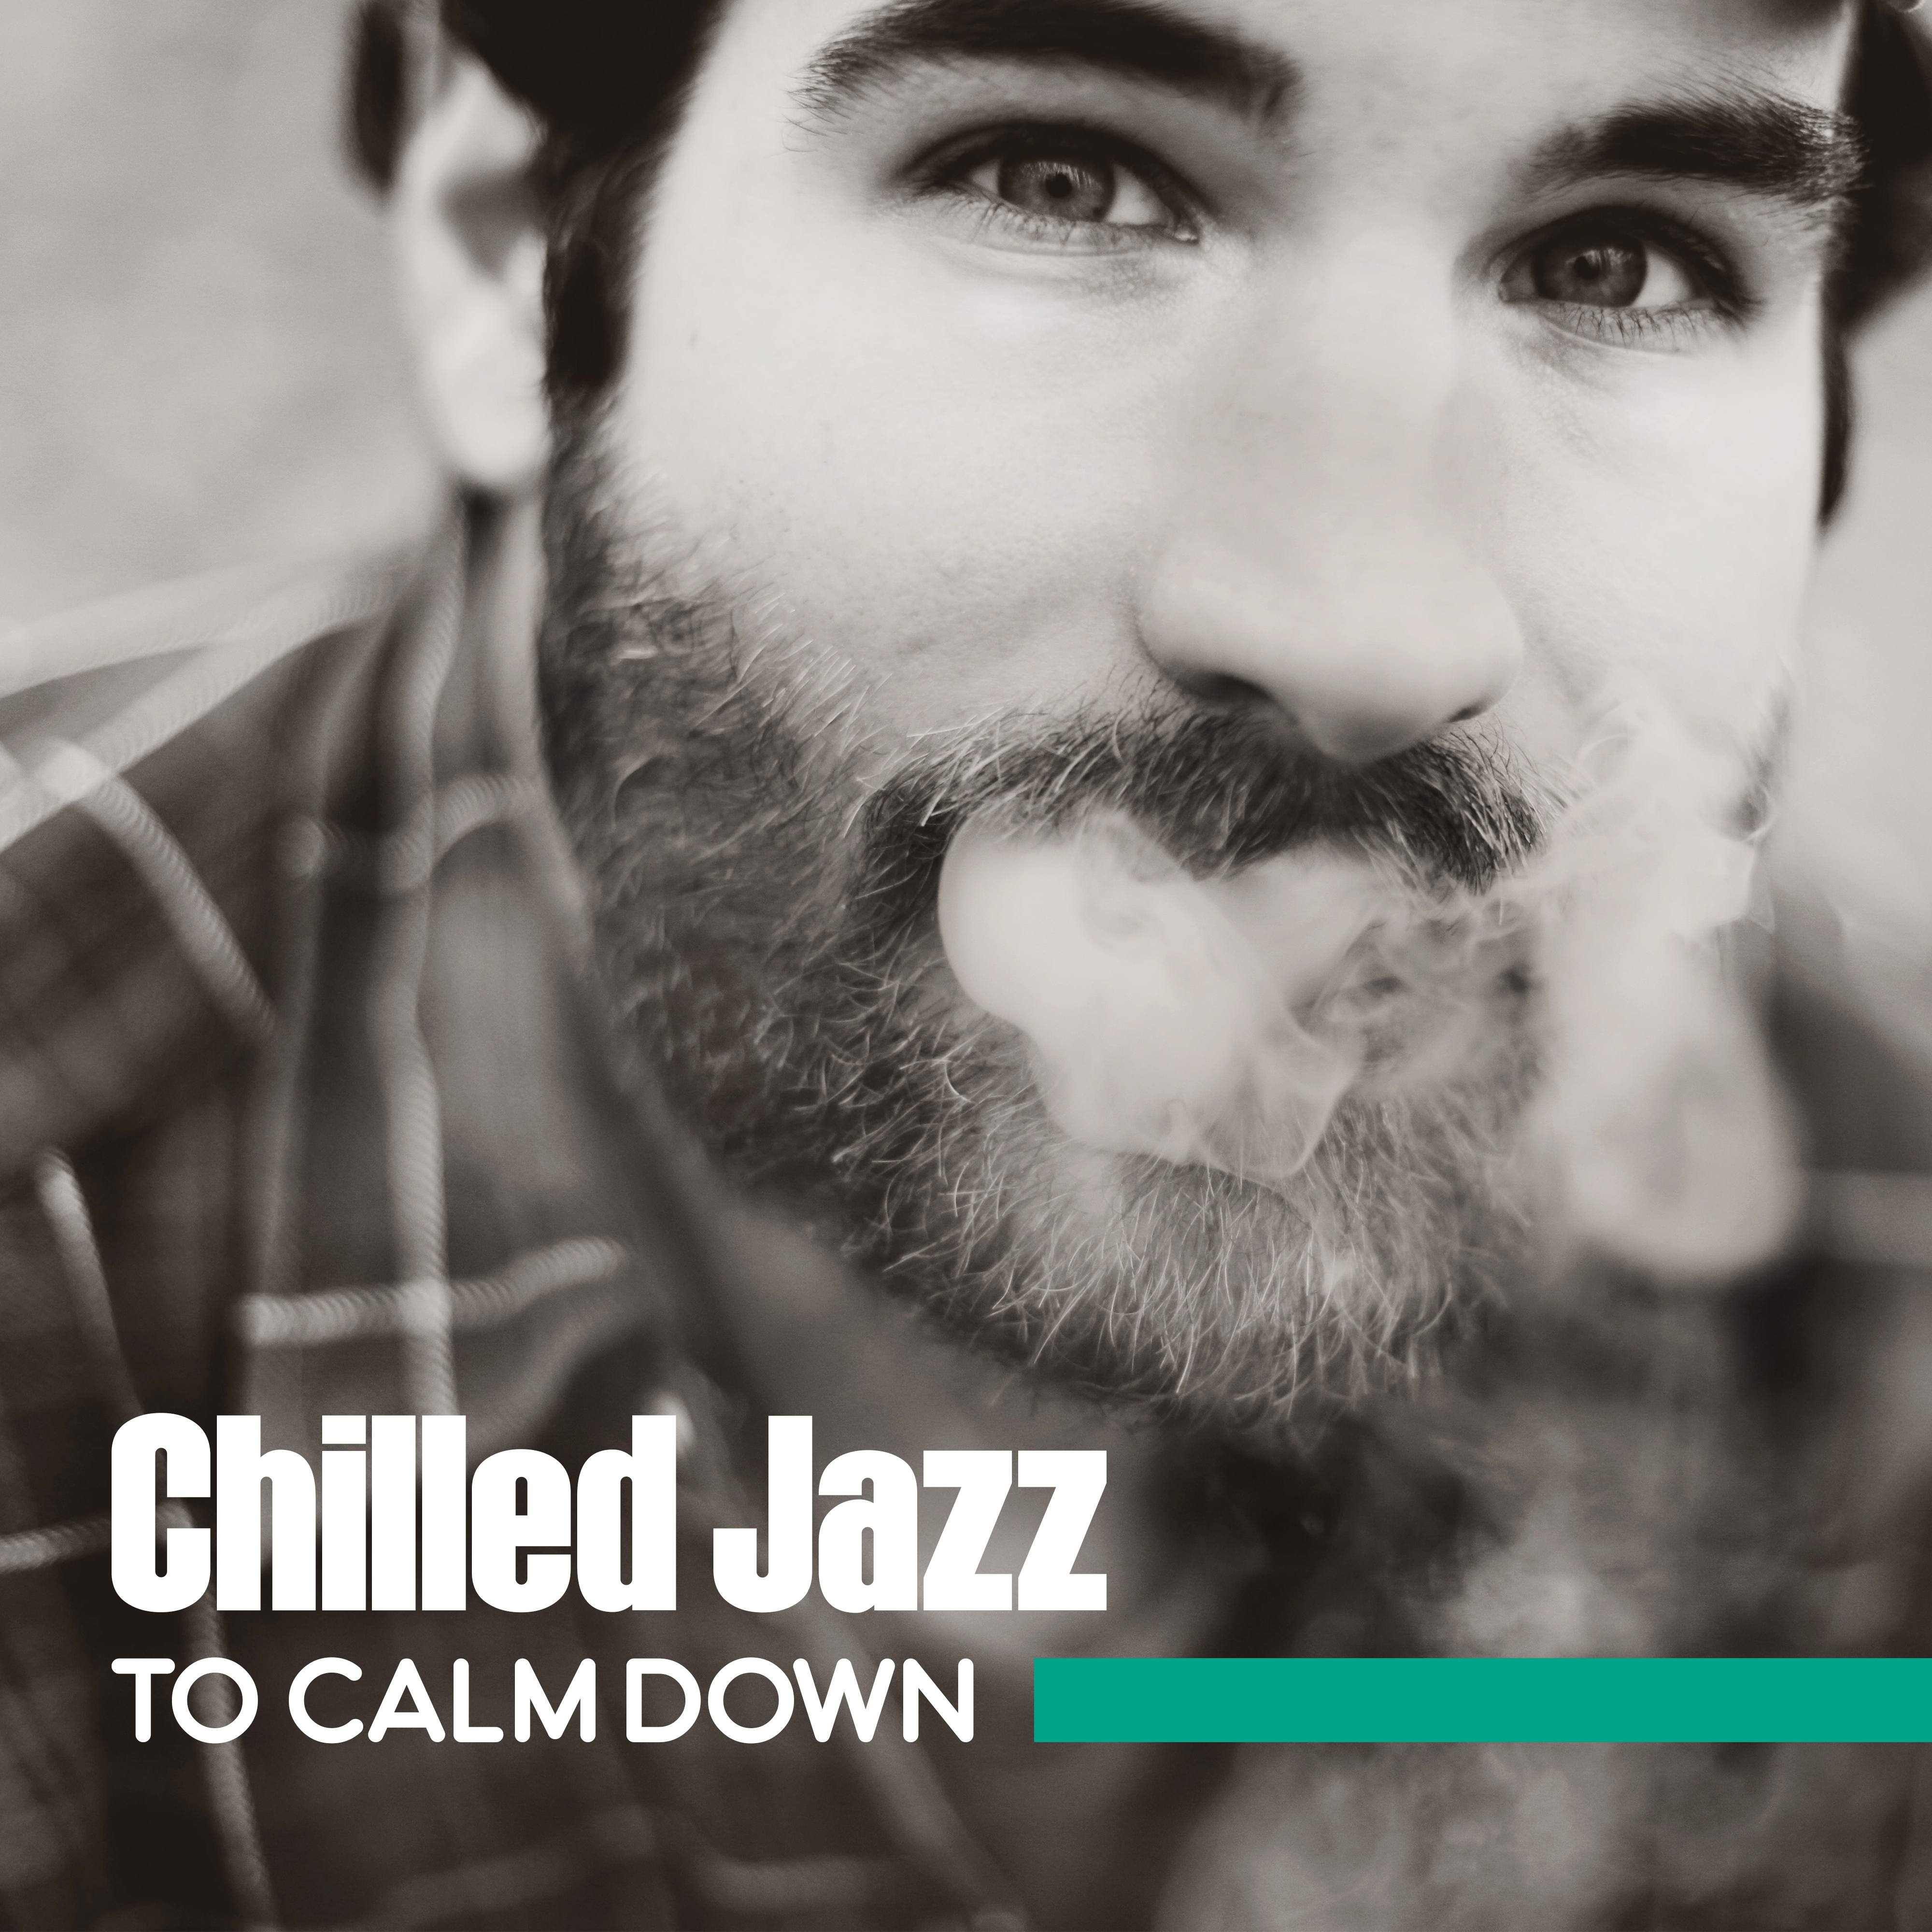 Chilled Jazz to Calm Down  Smooth Sounds to Relax, Rest with Jazz, Moonlight Piano, Evening Relaxation